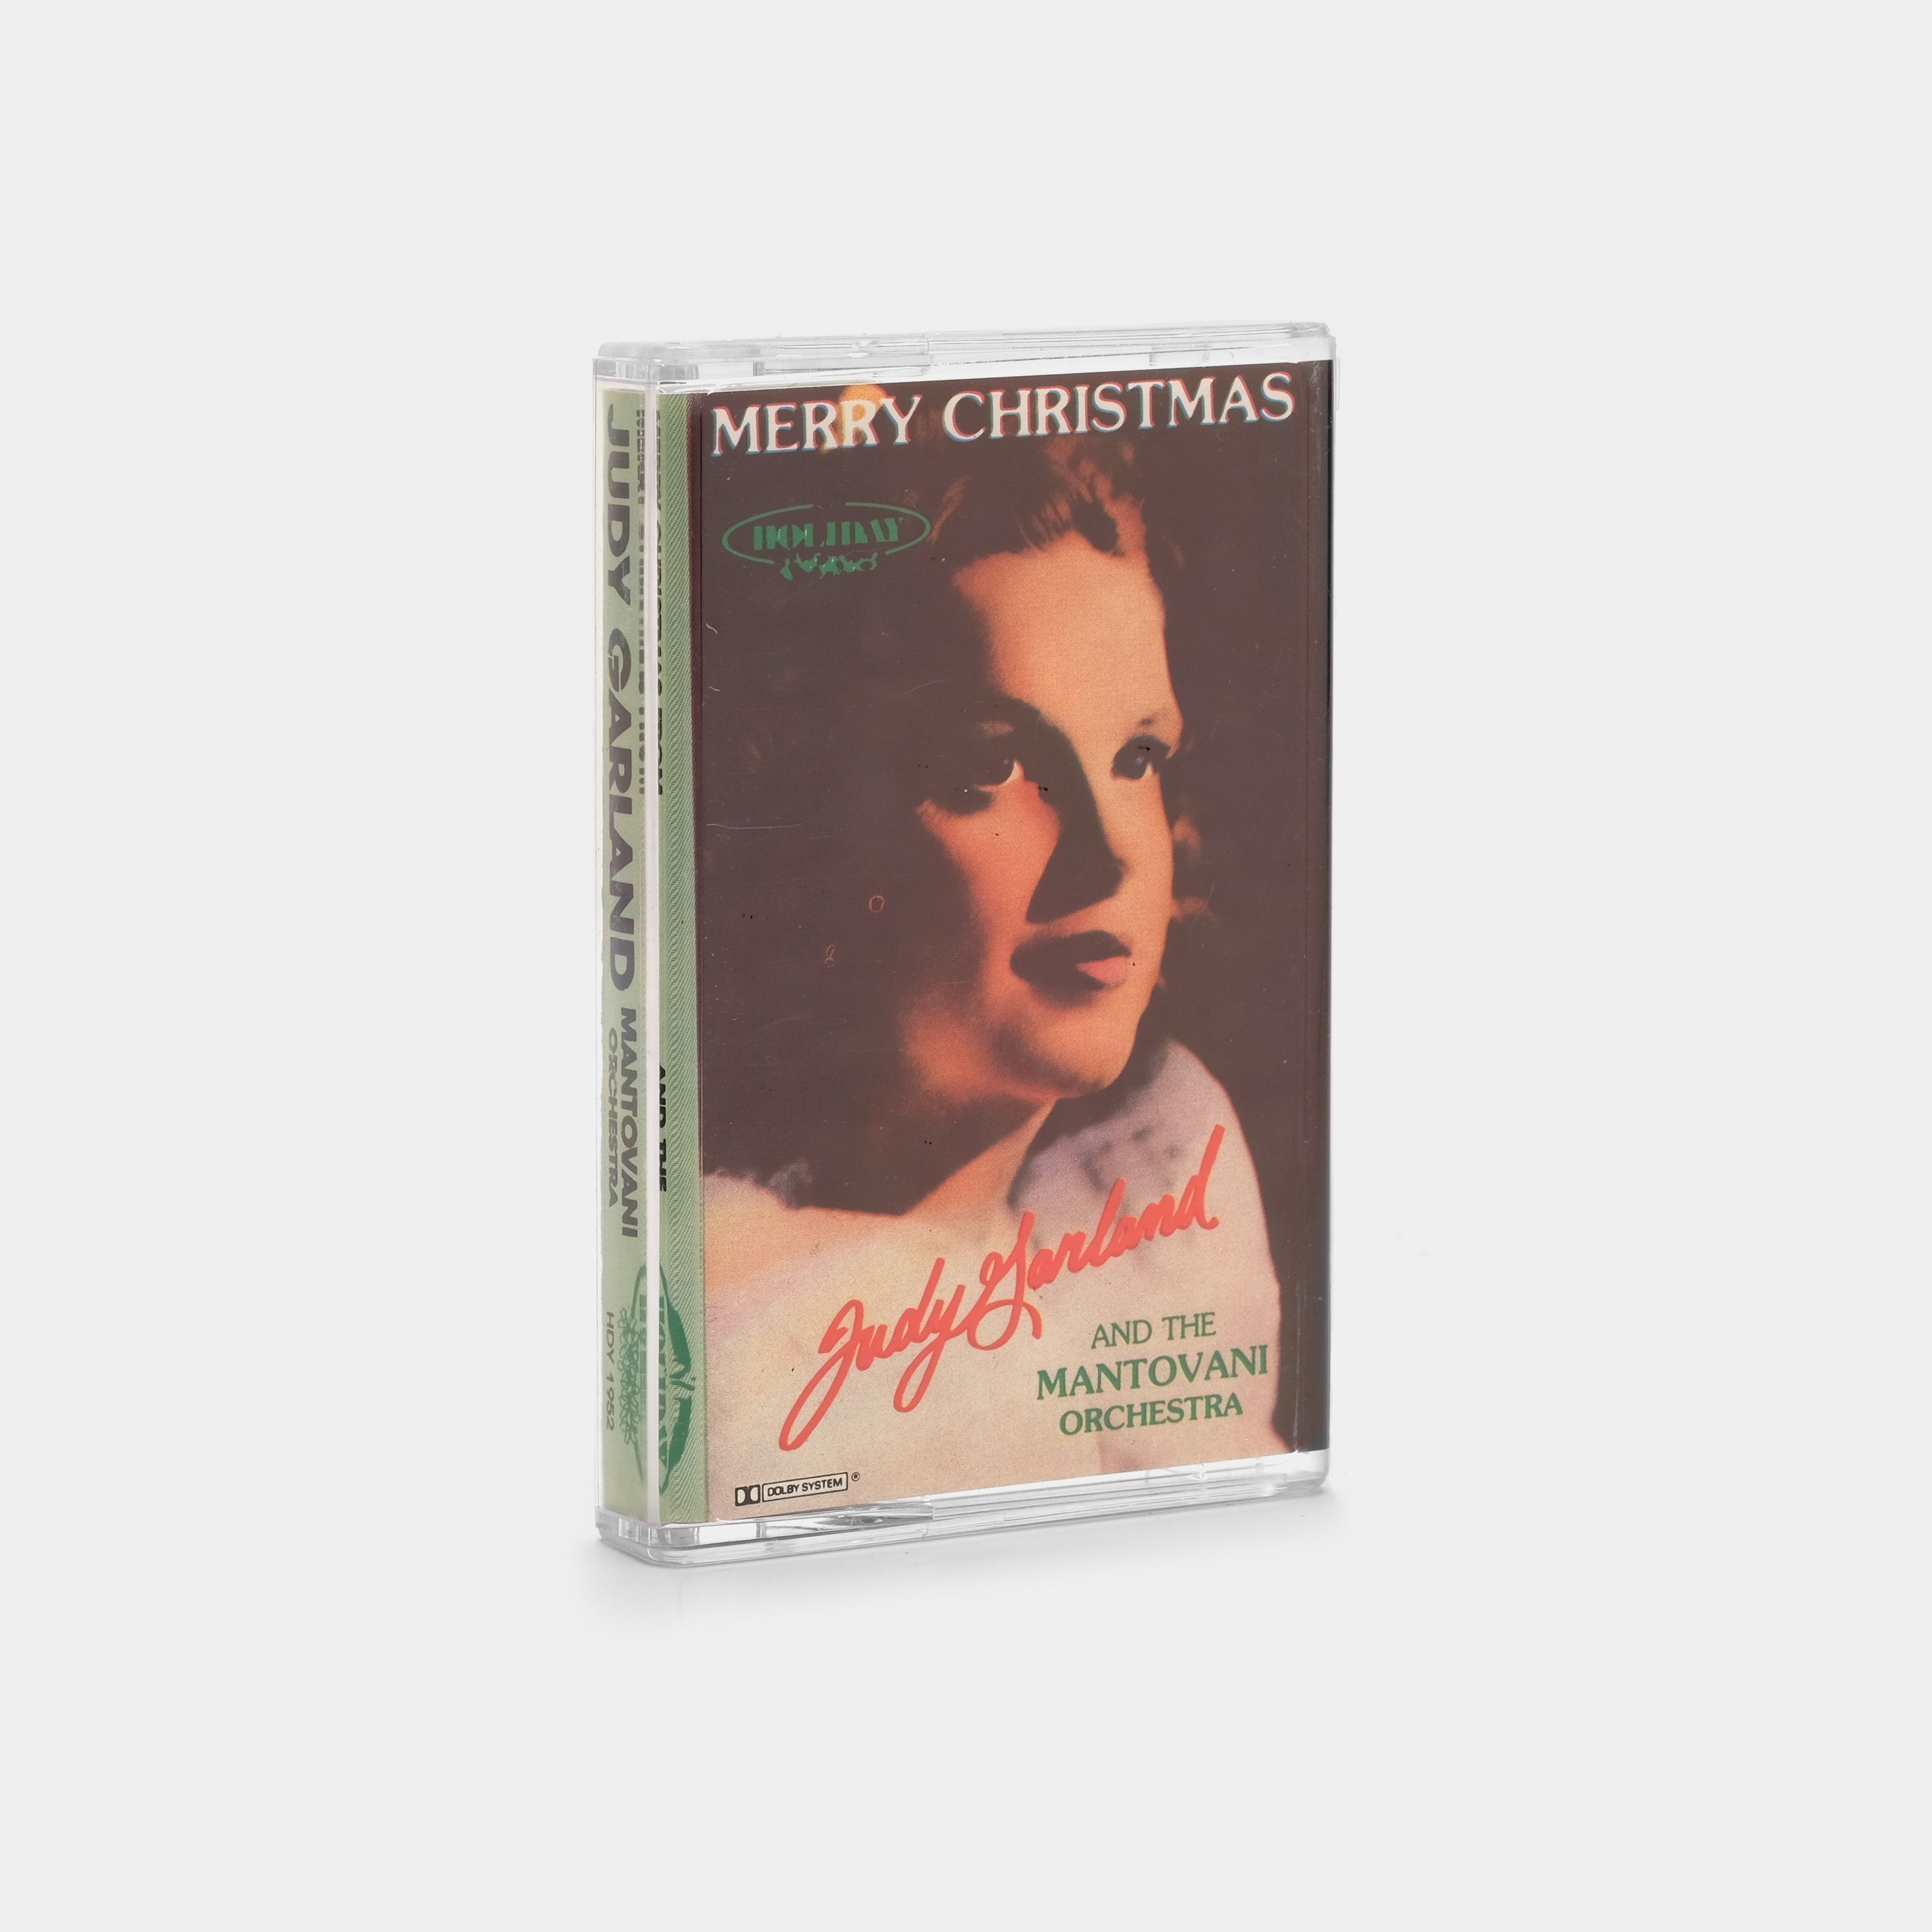 Judy Garland and The Mantovani Orchestra - Merry Christmas Cassette Tape